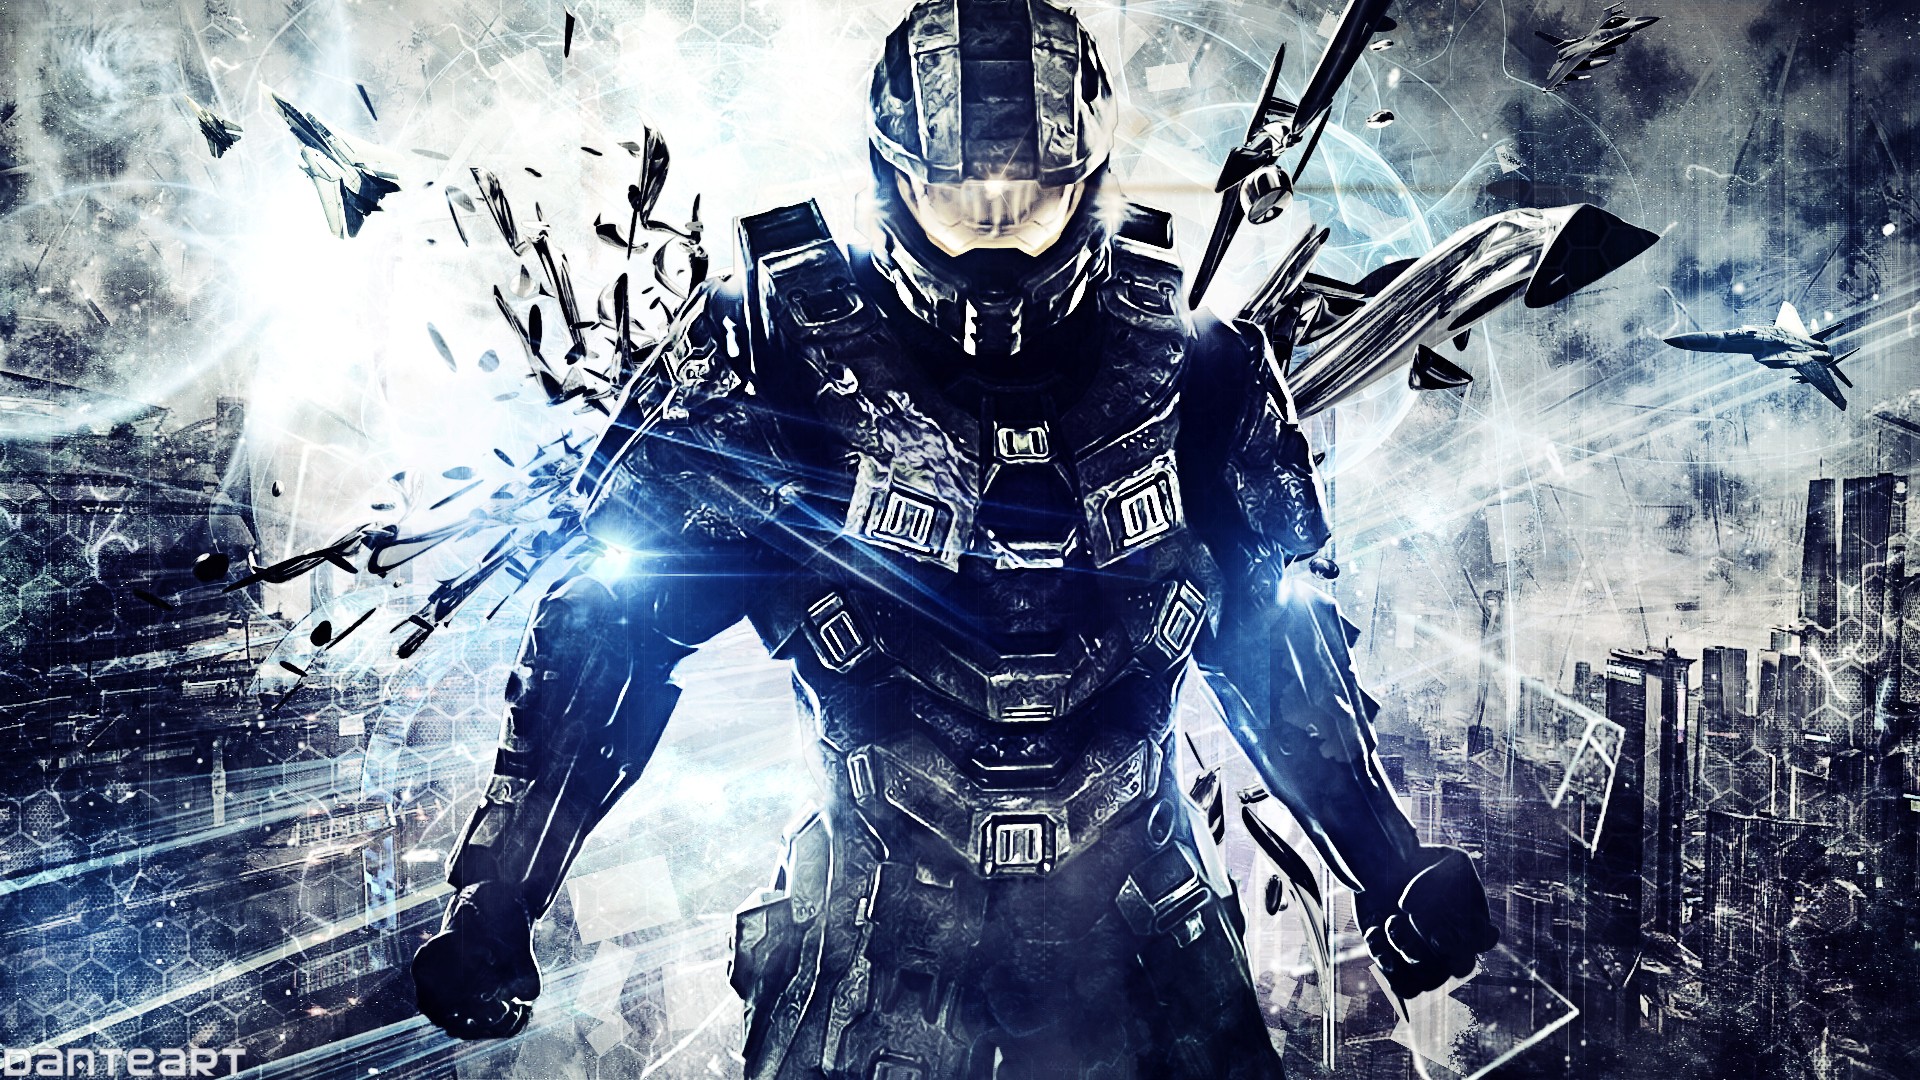 Cool Halo Backgrounds - HD Wallpaper 